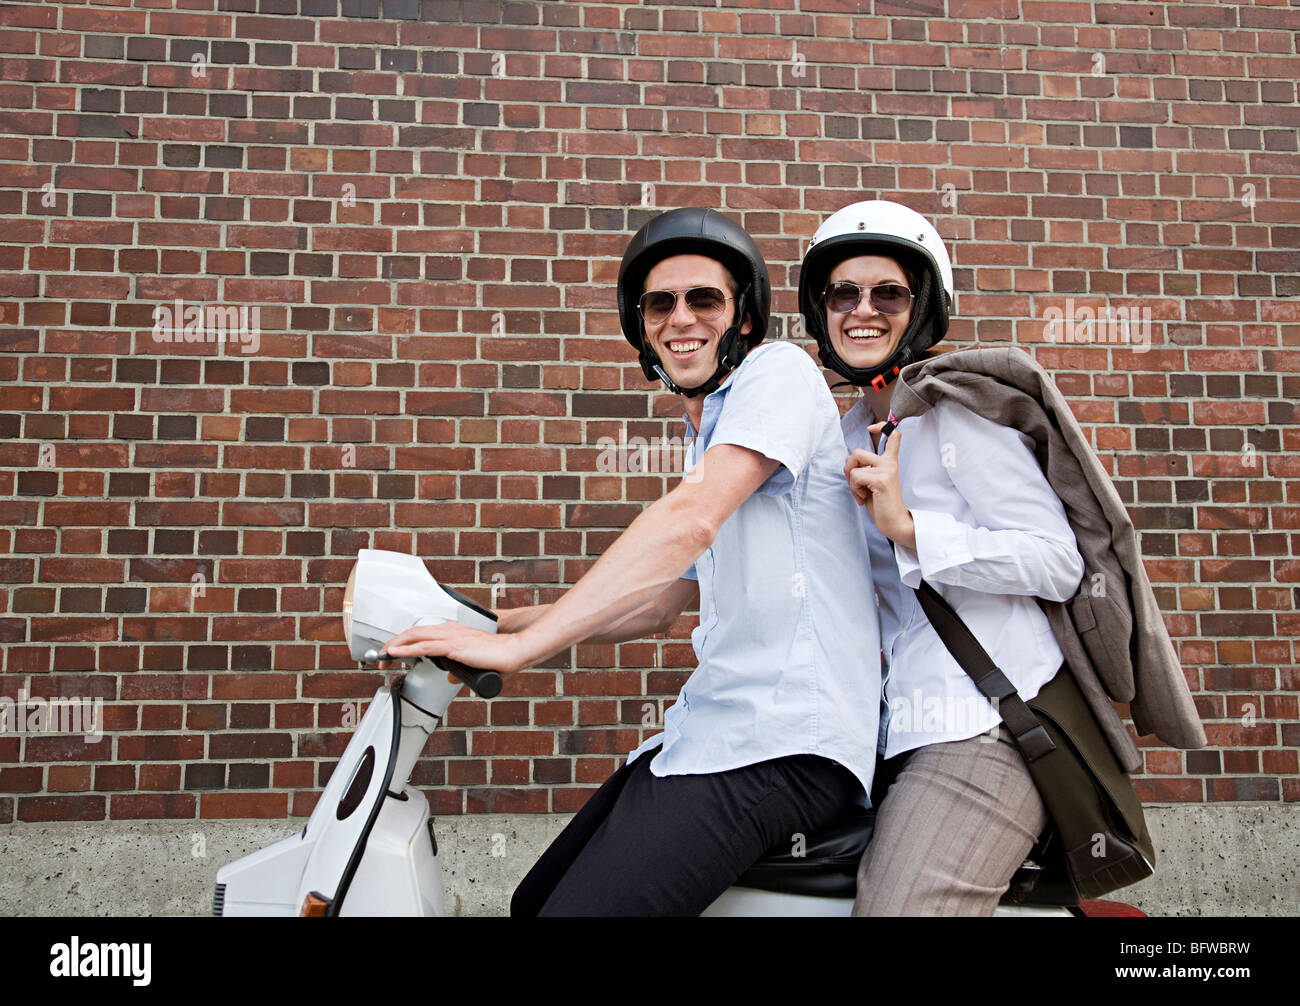 couple on scooter Stock Photo